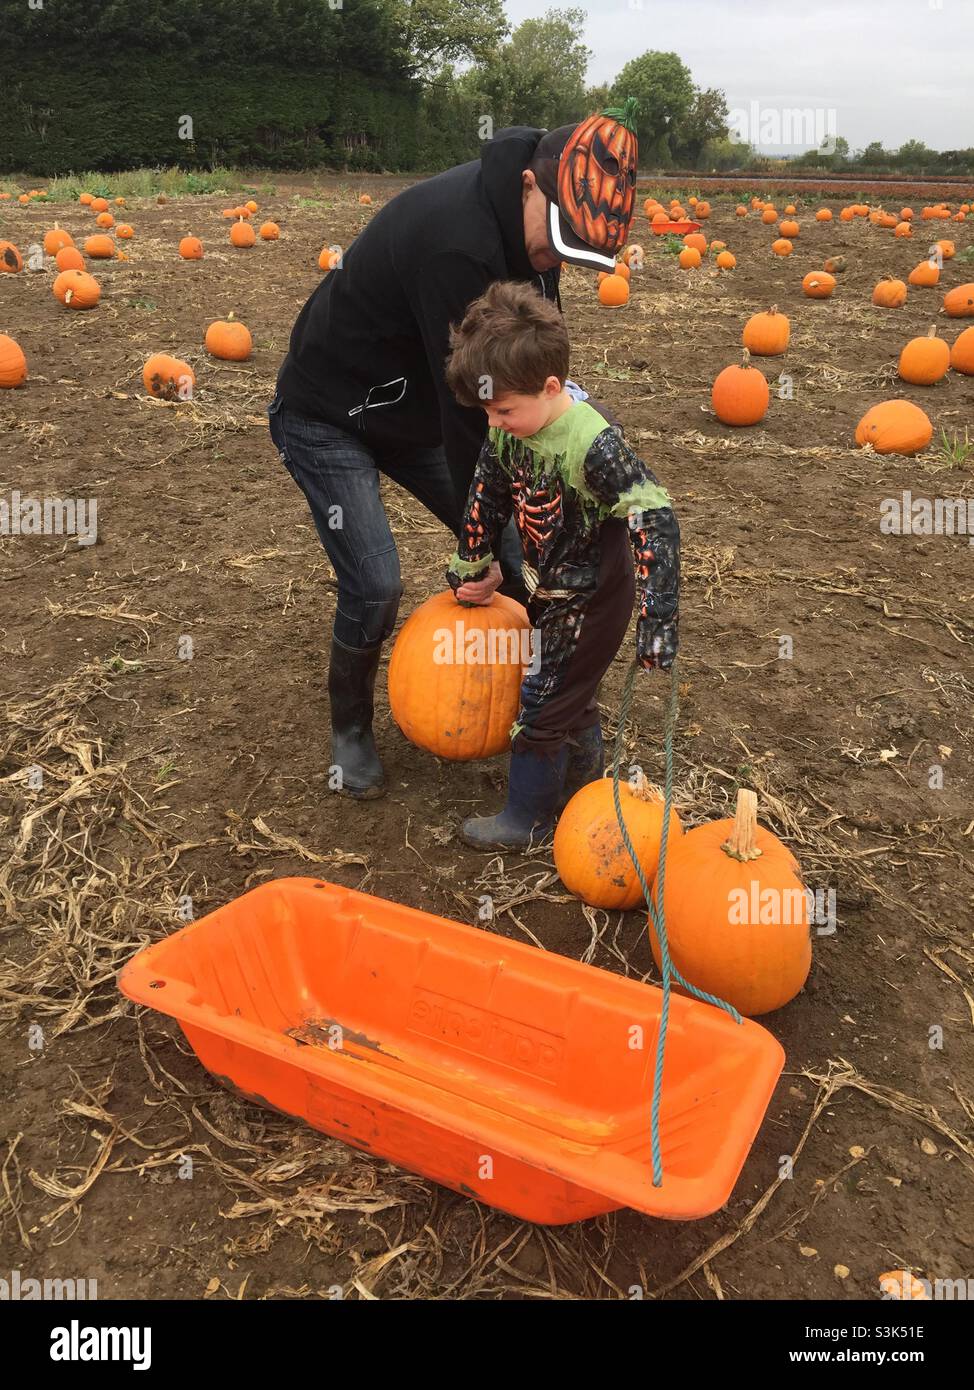 A child and grandfather pick a large pumpkin and load it into an orange sledge Stock Photo